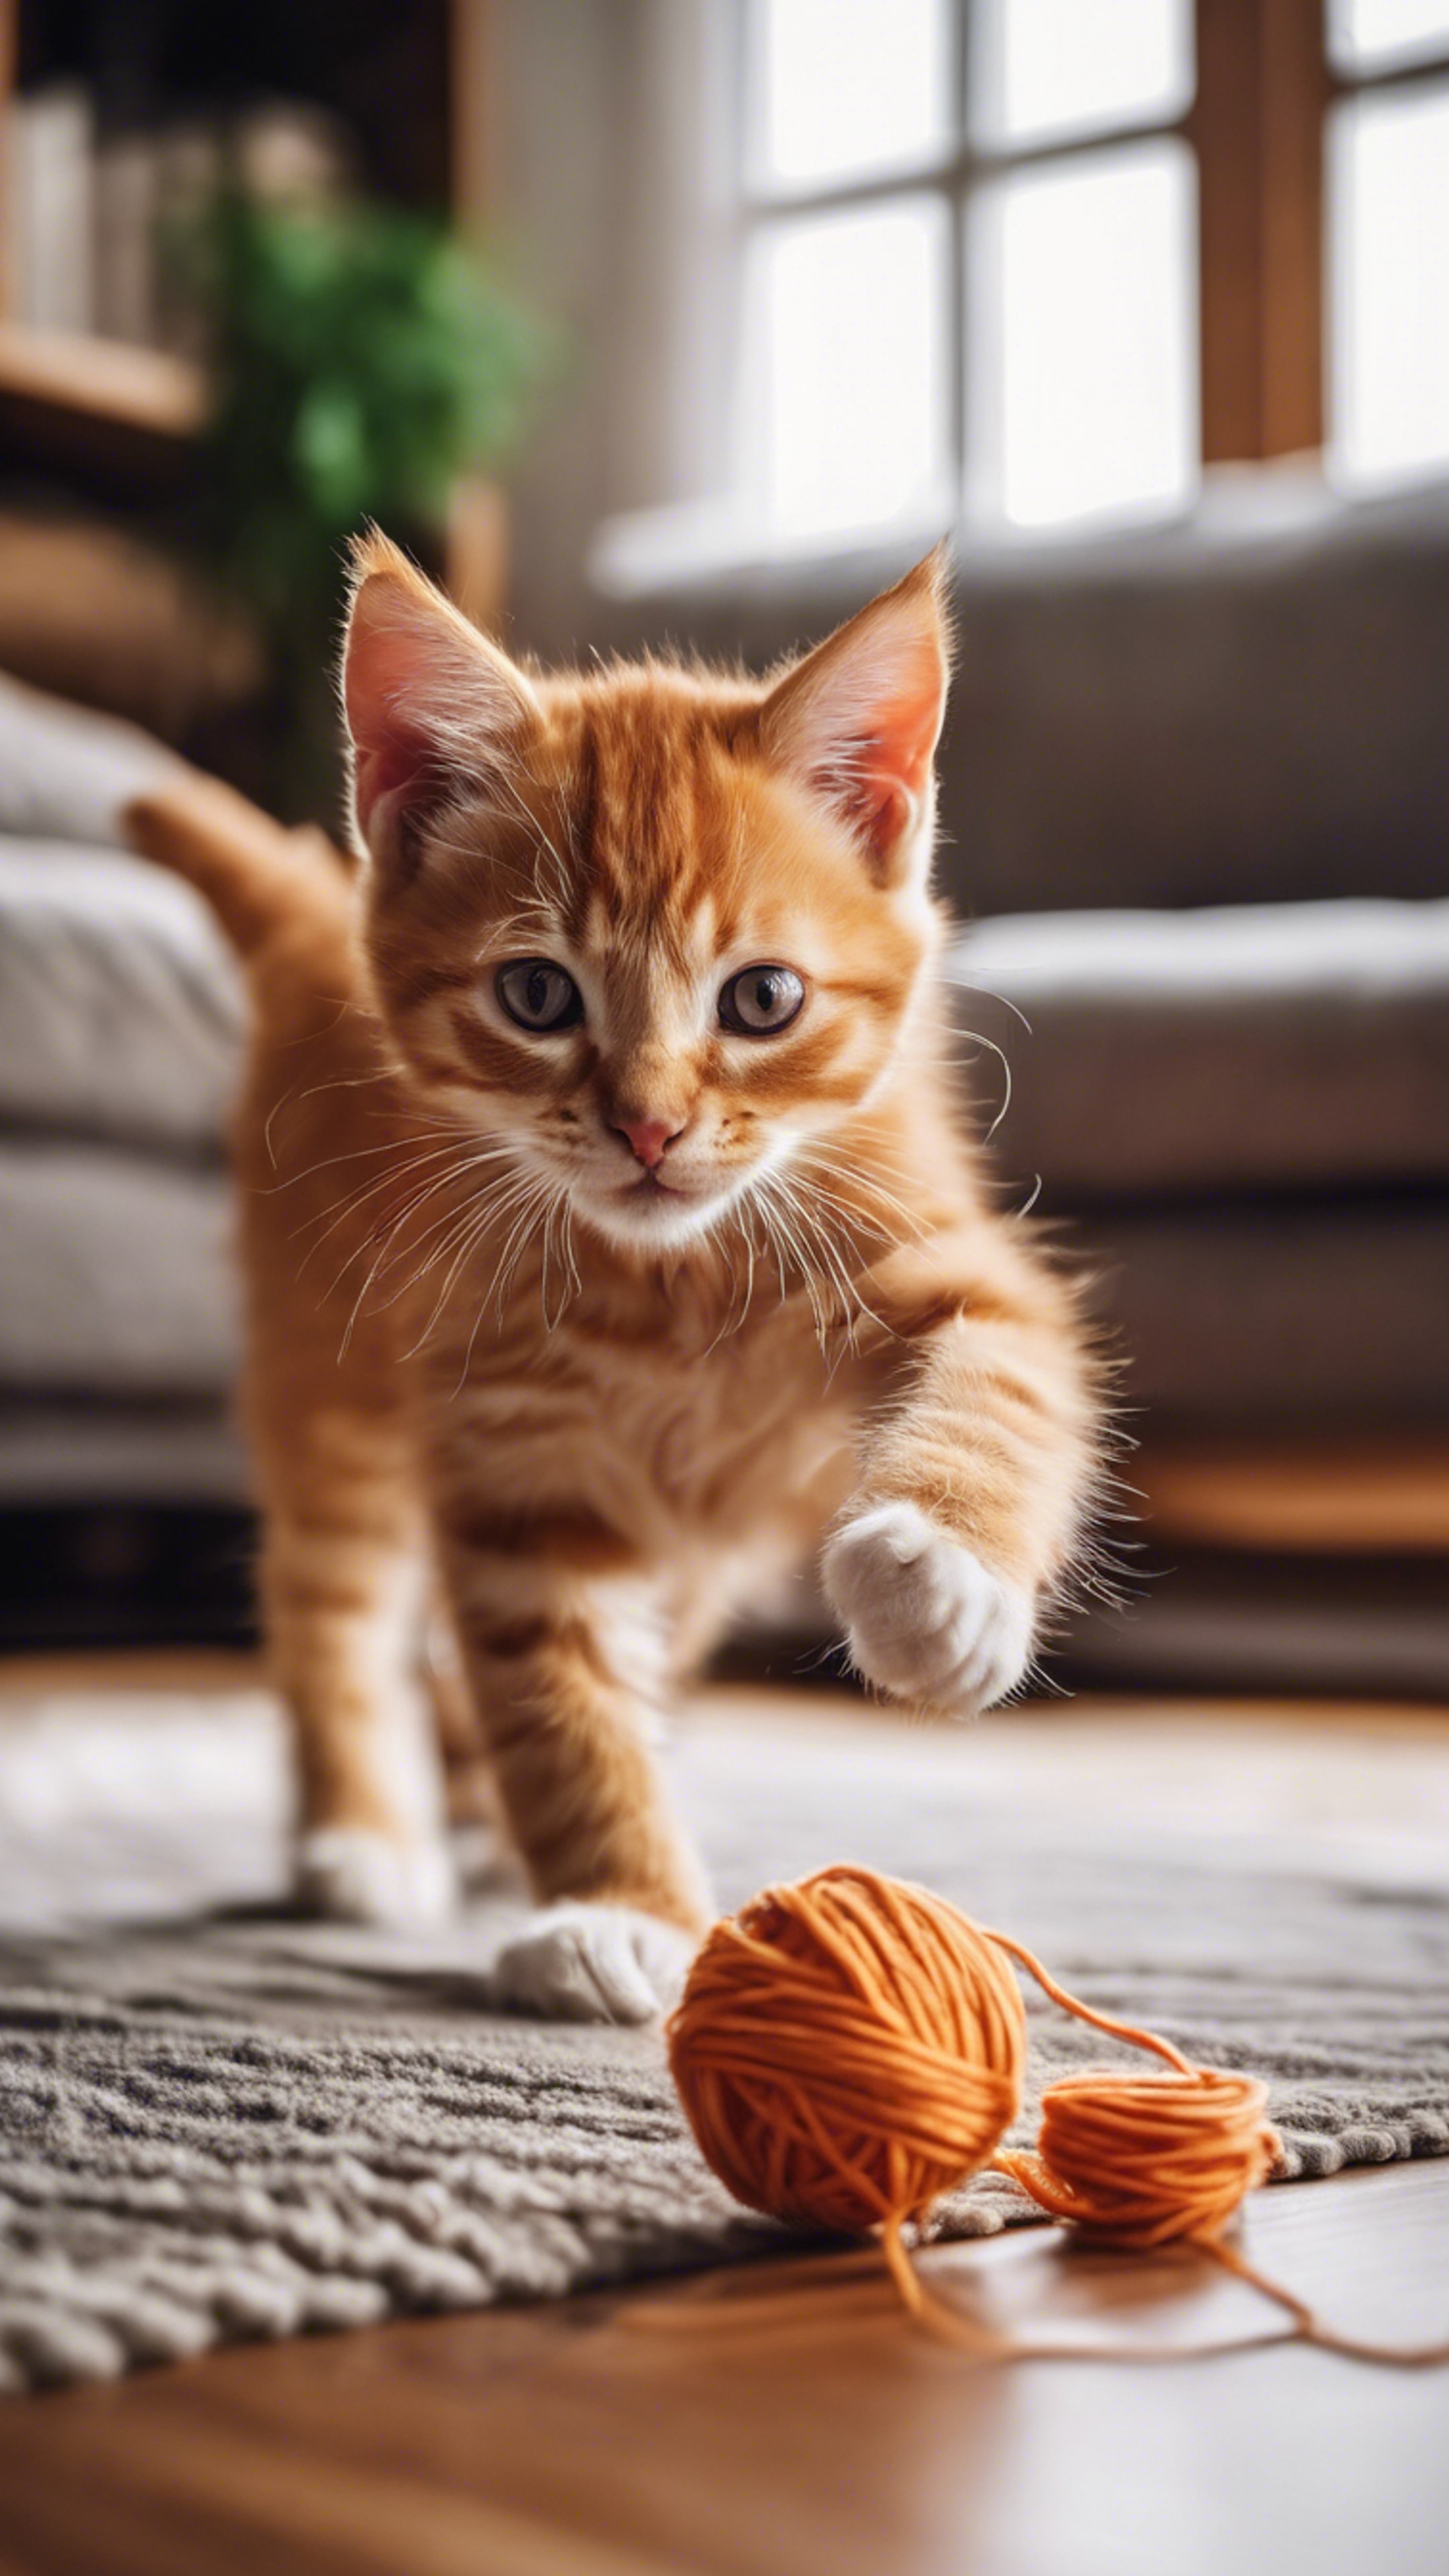 A playful orange tabby kitten, chasing a ball of yarn in a cozy wooden living room.壁紙[48ba56b3f1554d3caaed]